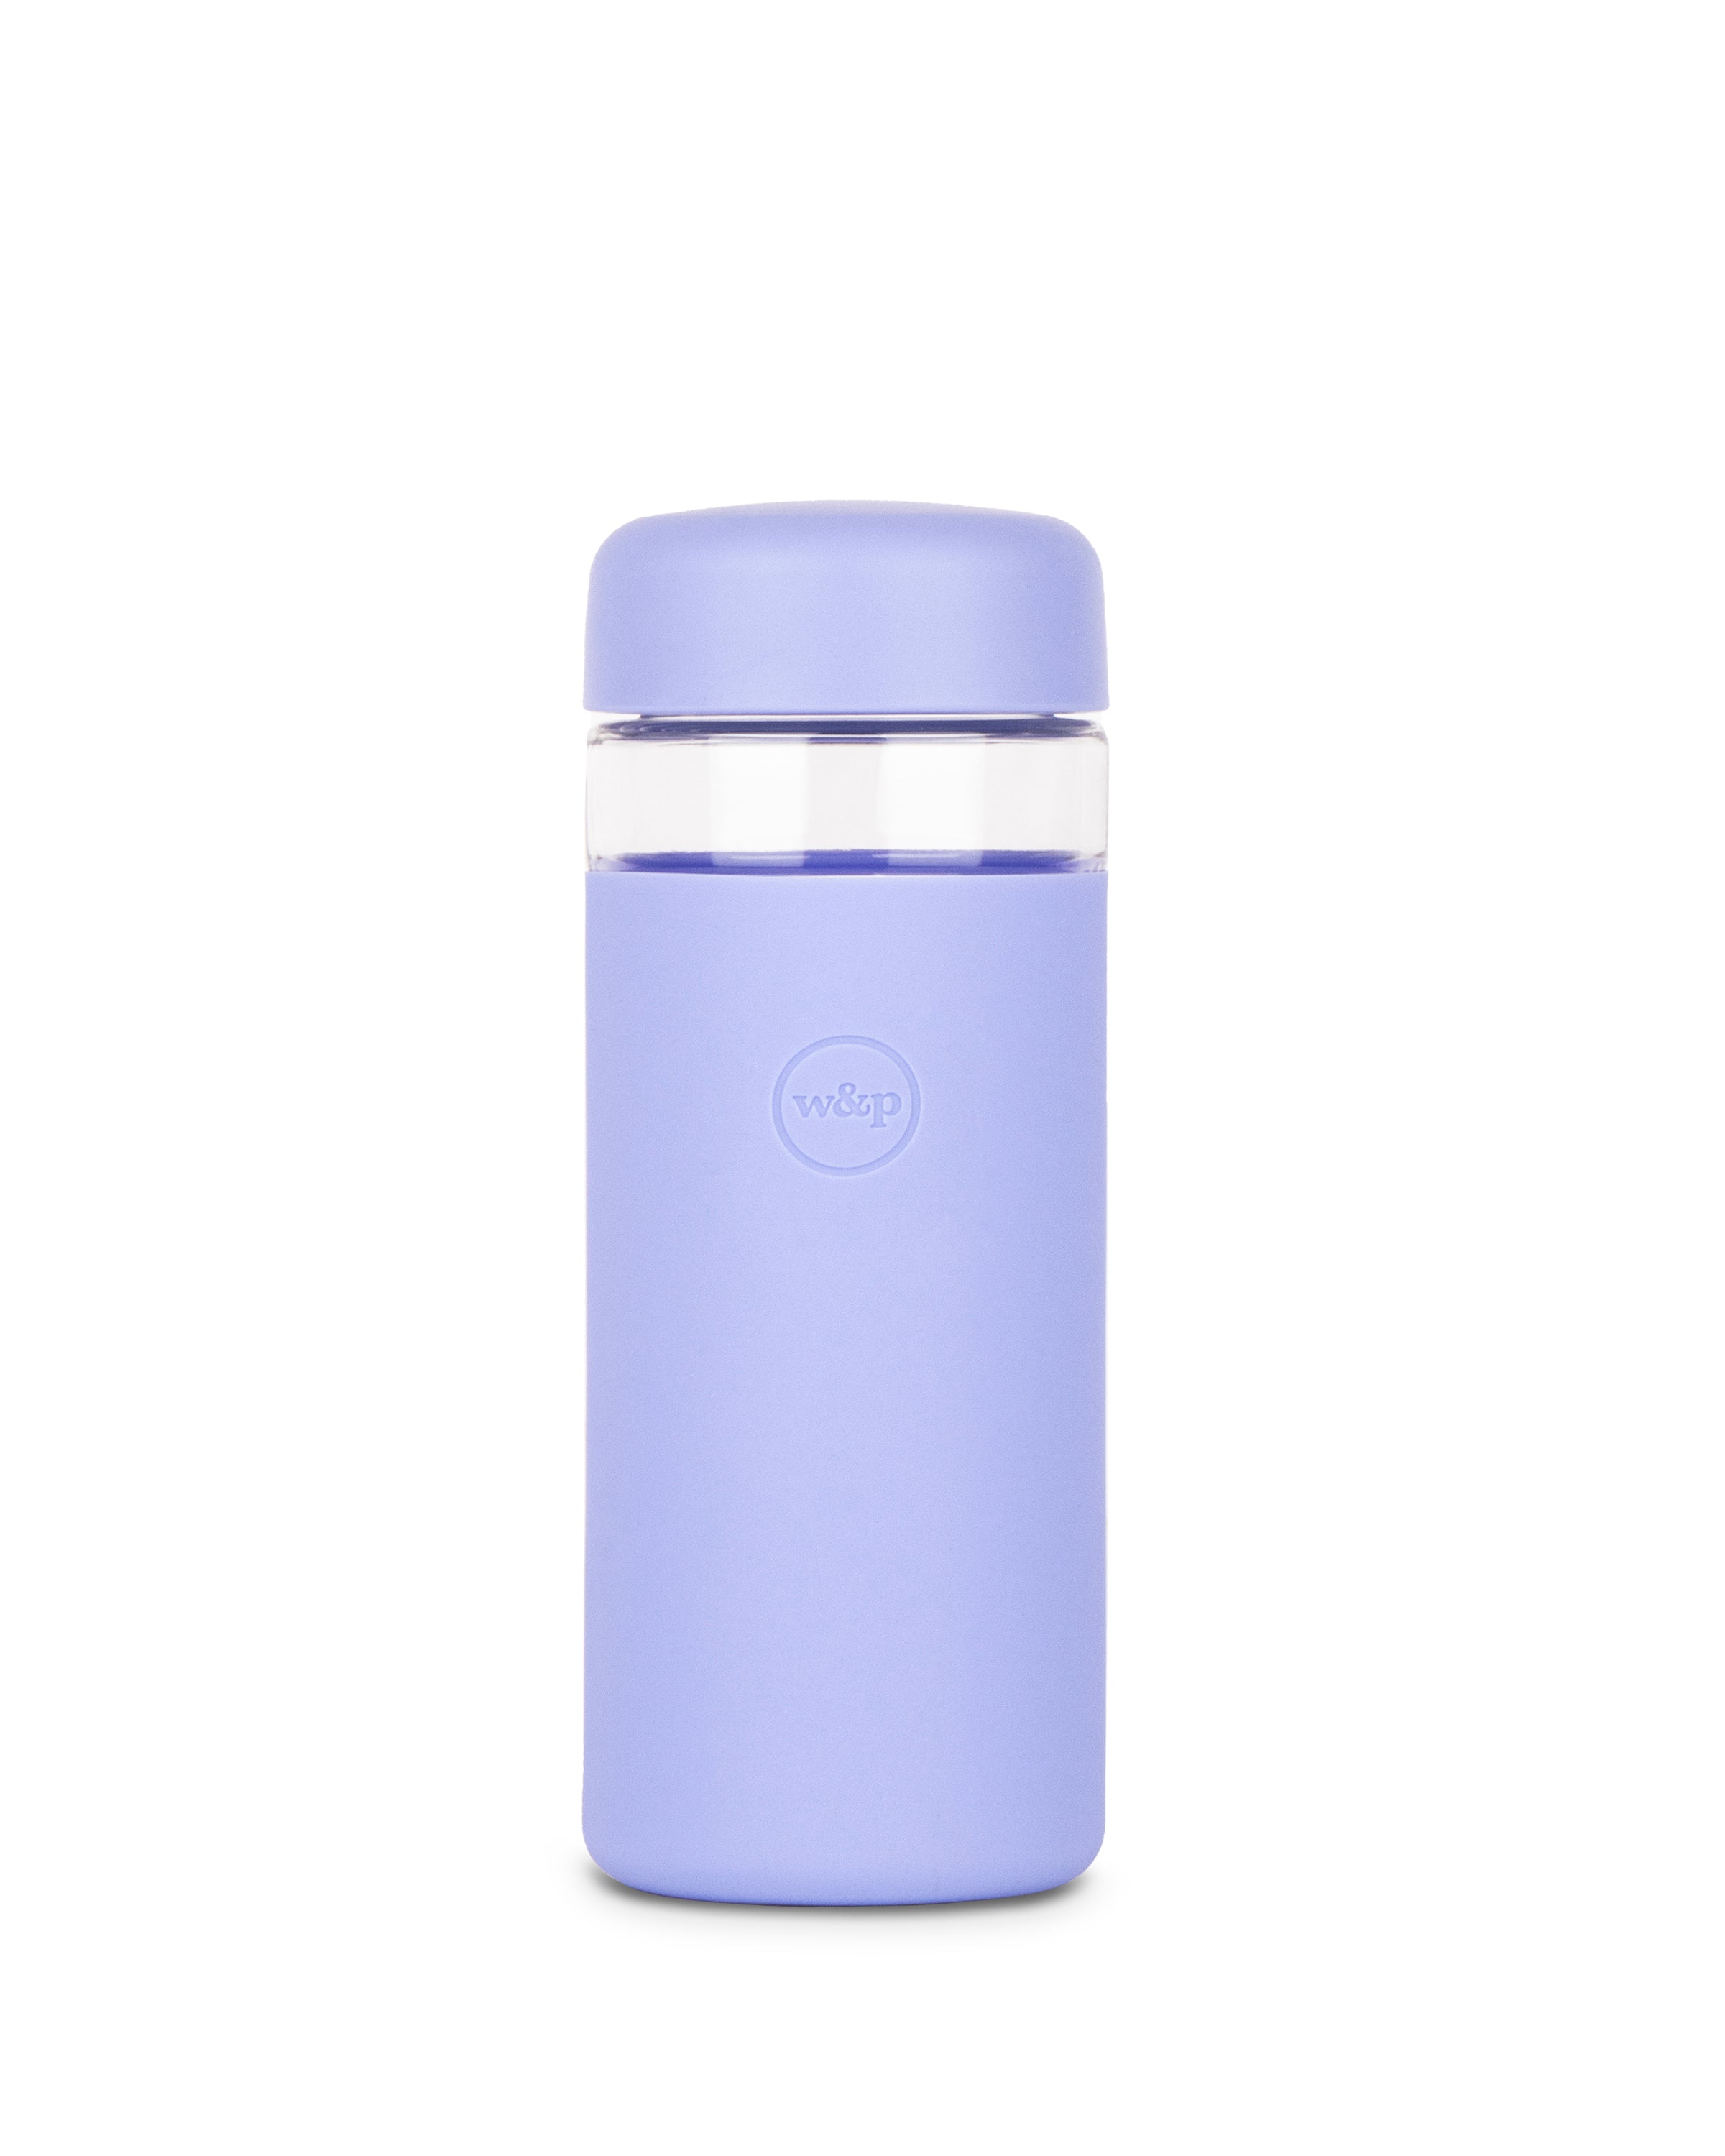 Buy Wholesale China 3 Pcs Protein Powder Containers Bpa Free Mini